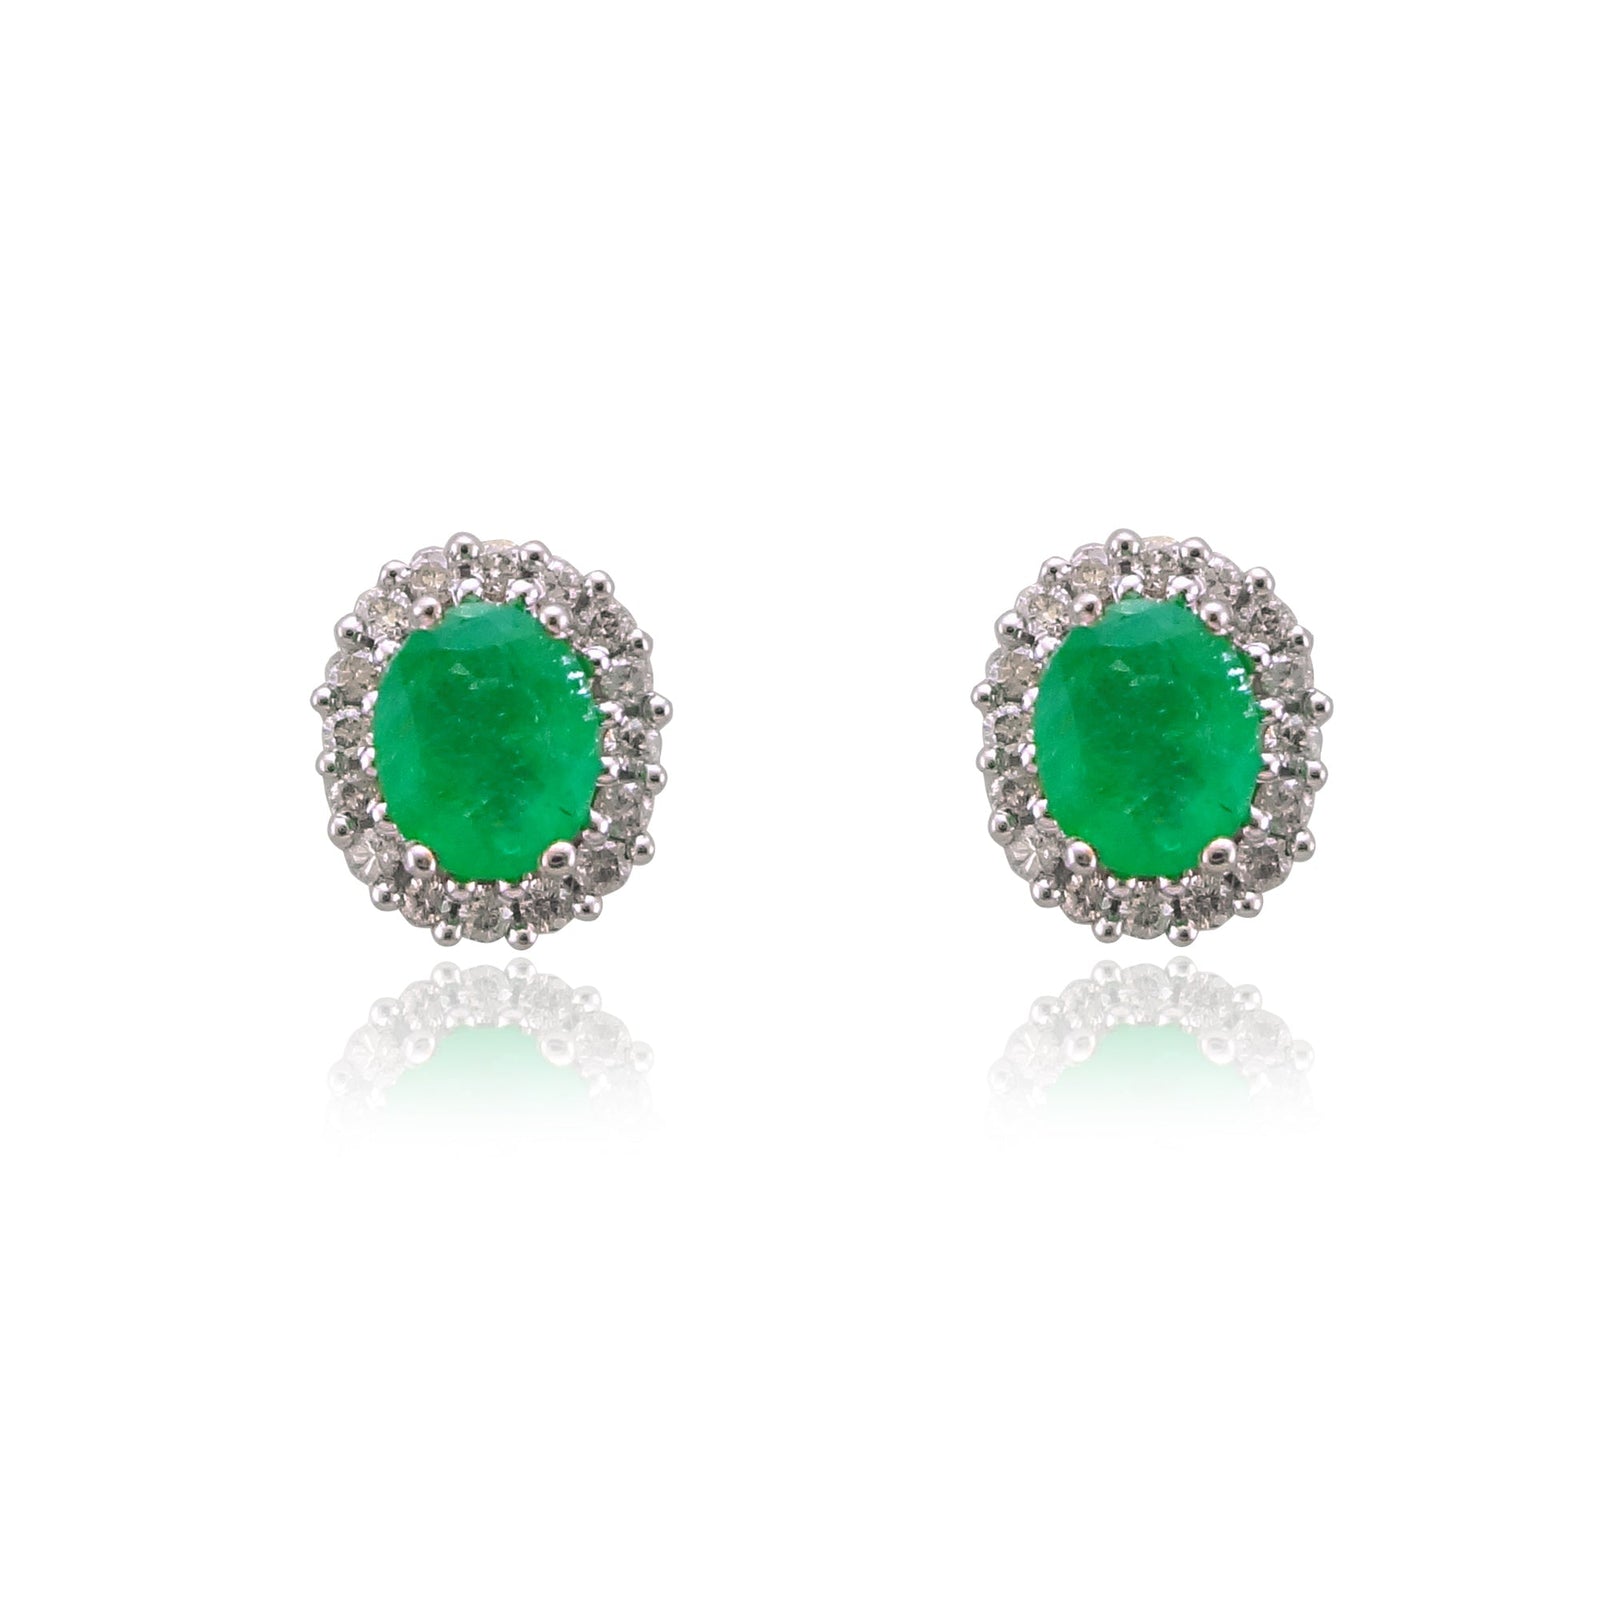 9ct gold 6x4mm oval emerald & diamond cluster studs earrings 0.22ct